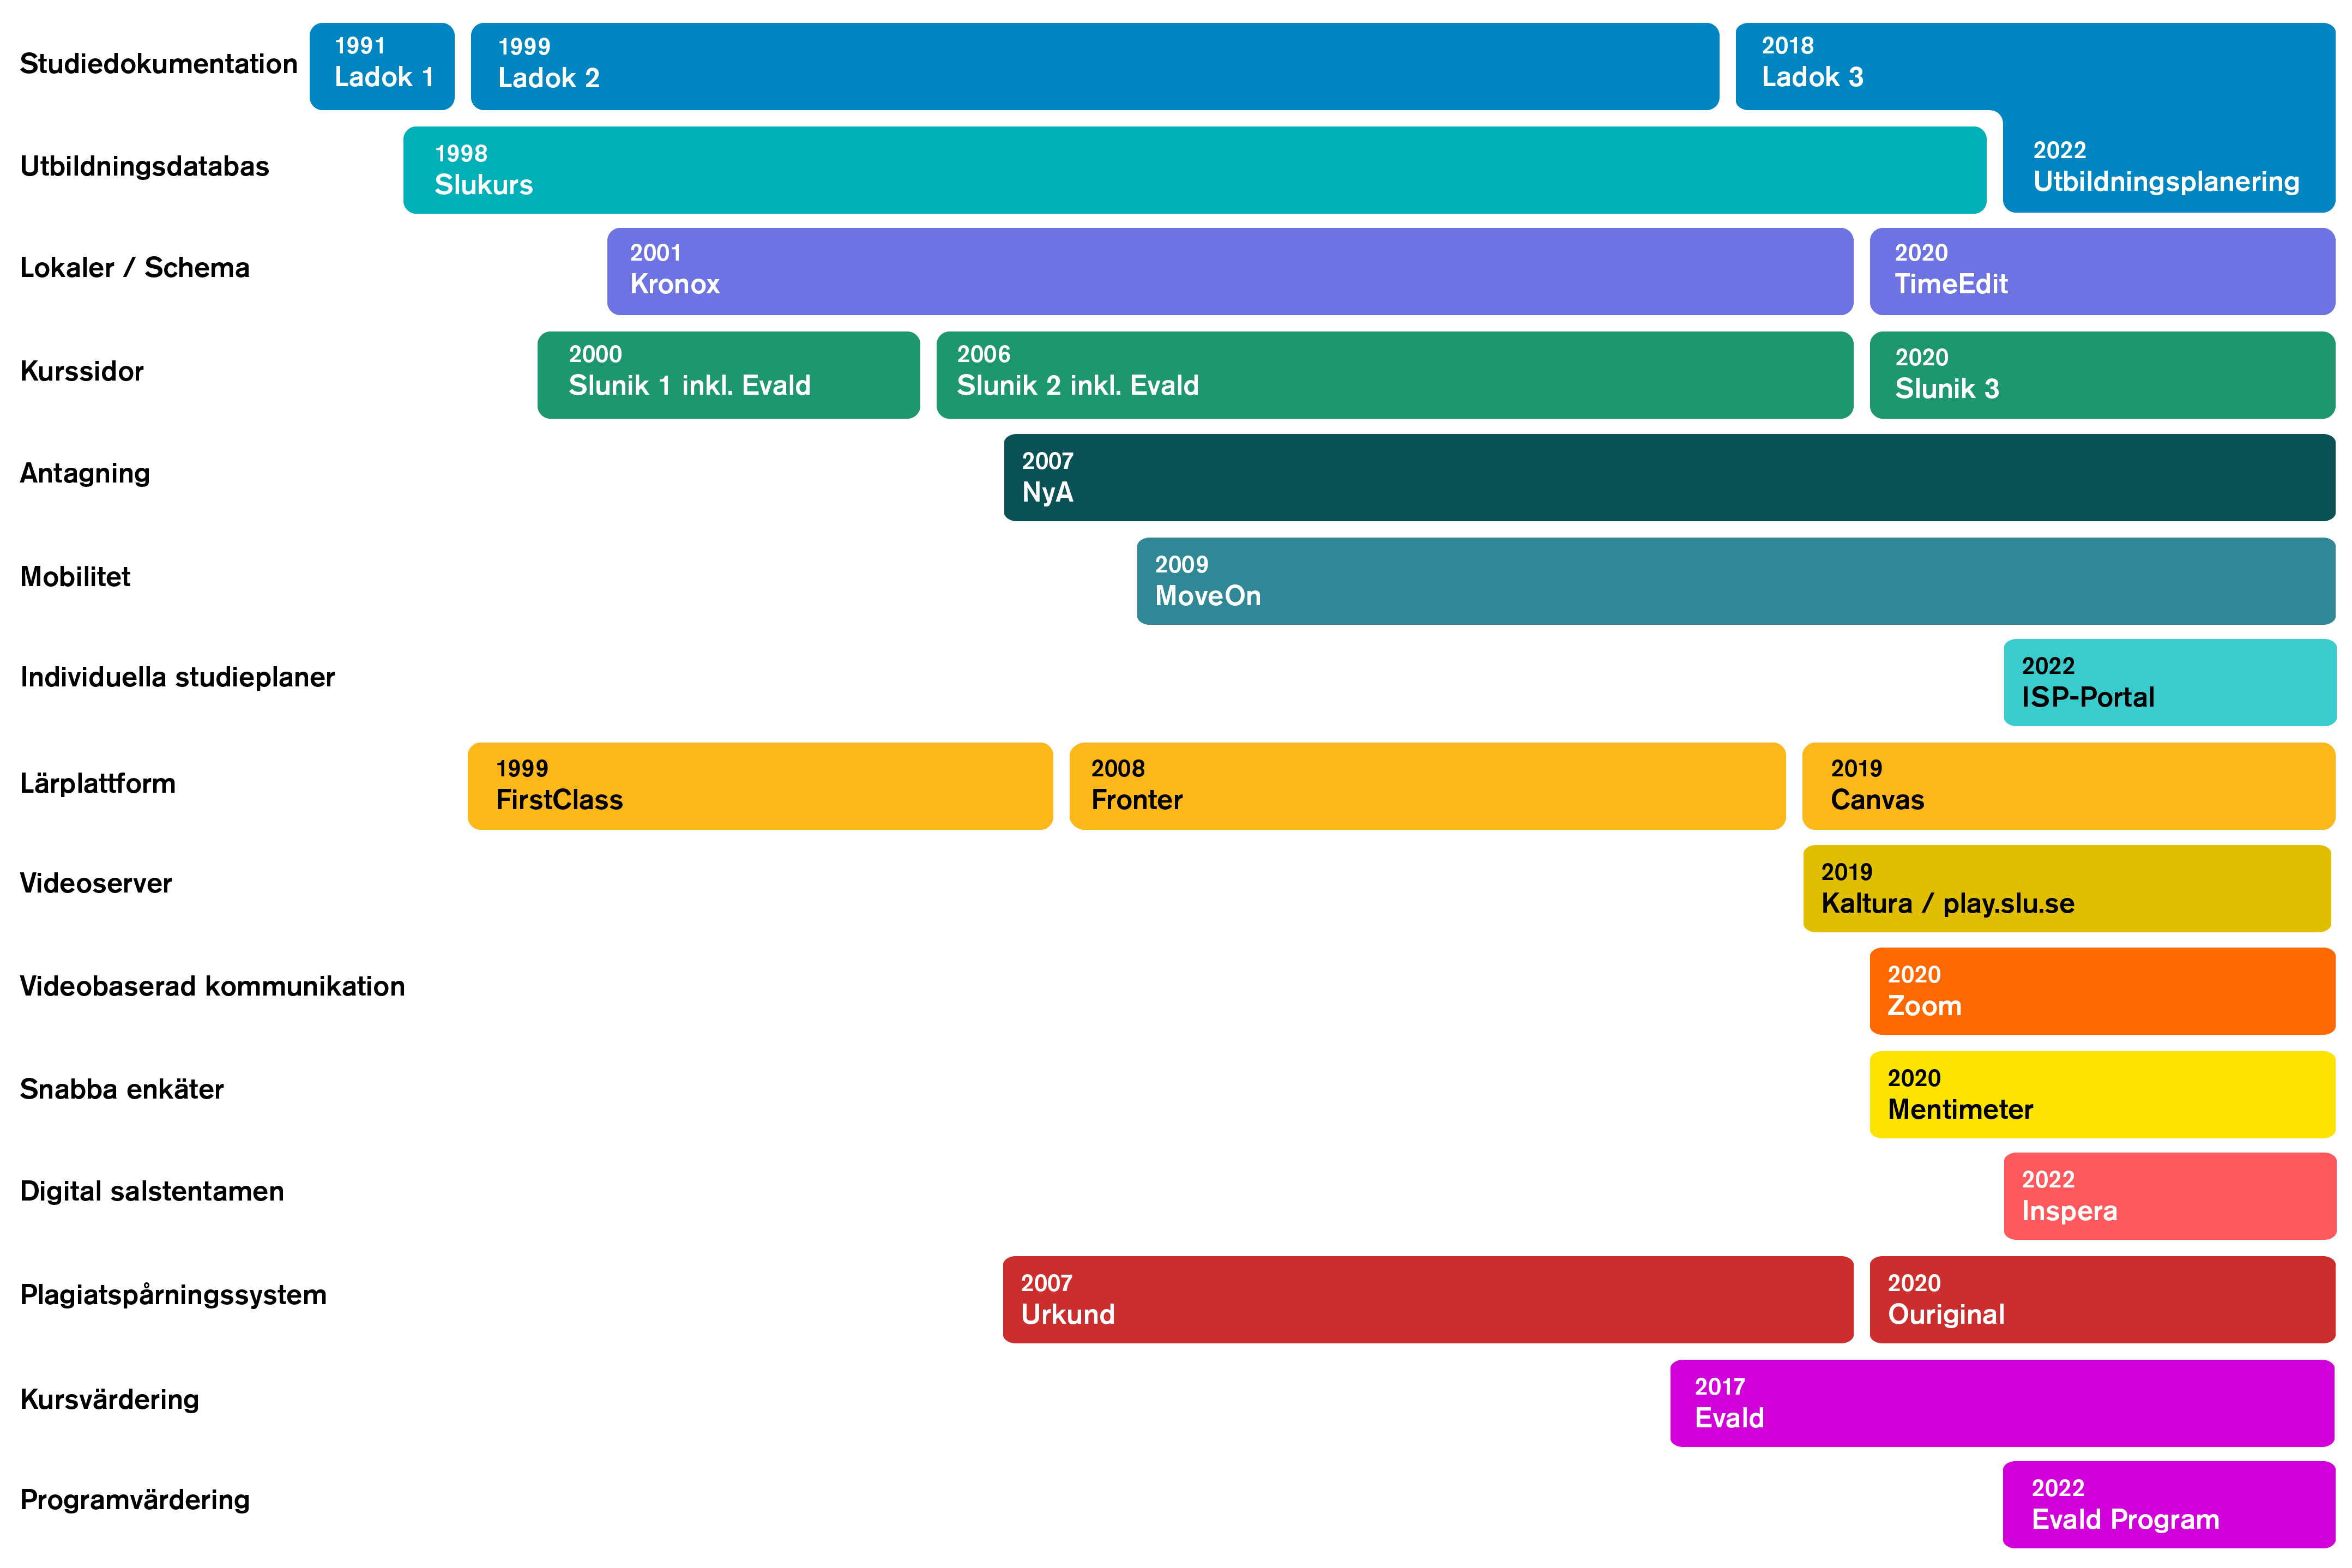 Timeline of when different systems were launched